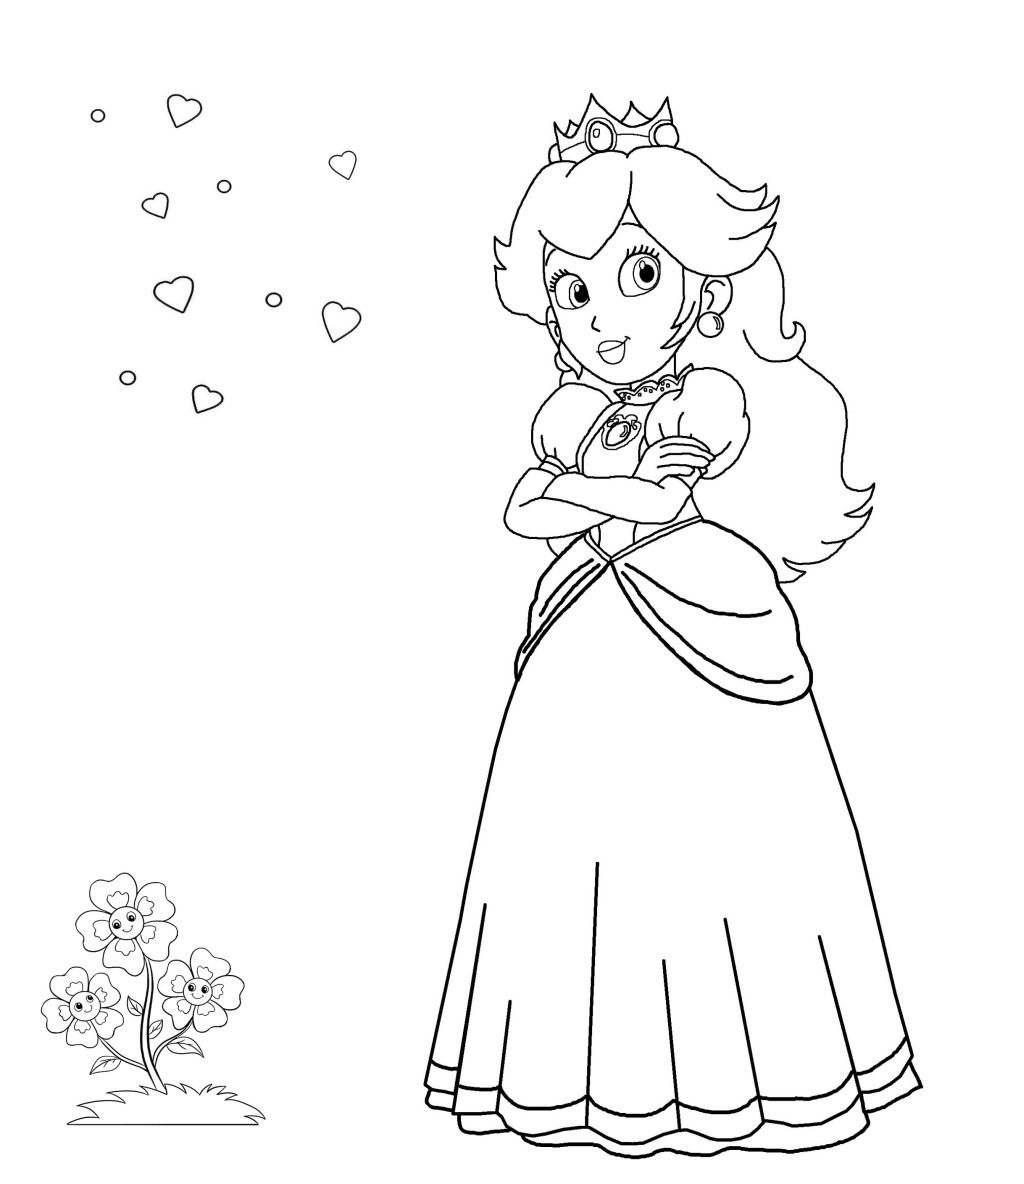 Princess for coloring